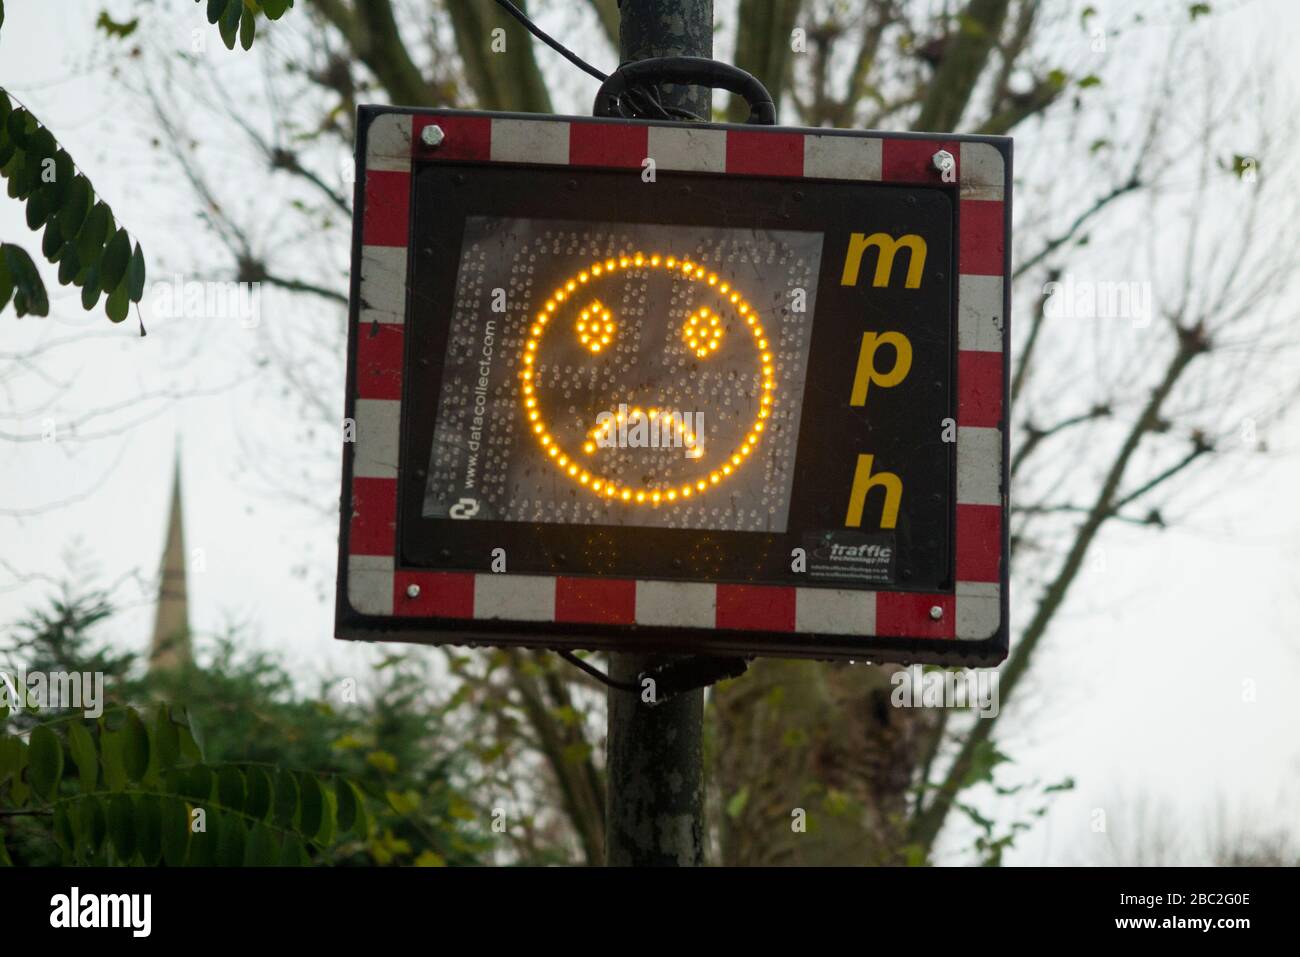 Speed Indicator Device (SID) in Hampton / Teddington, London, on a 20 mph mile per hour stretch of road: it displays a sad emoticon as a speeding car approaches or at excessive speed of approaching cars / vehicle. Stock Photo